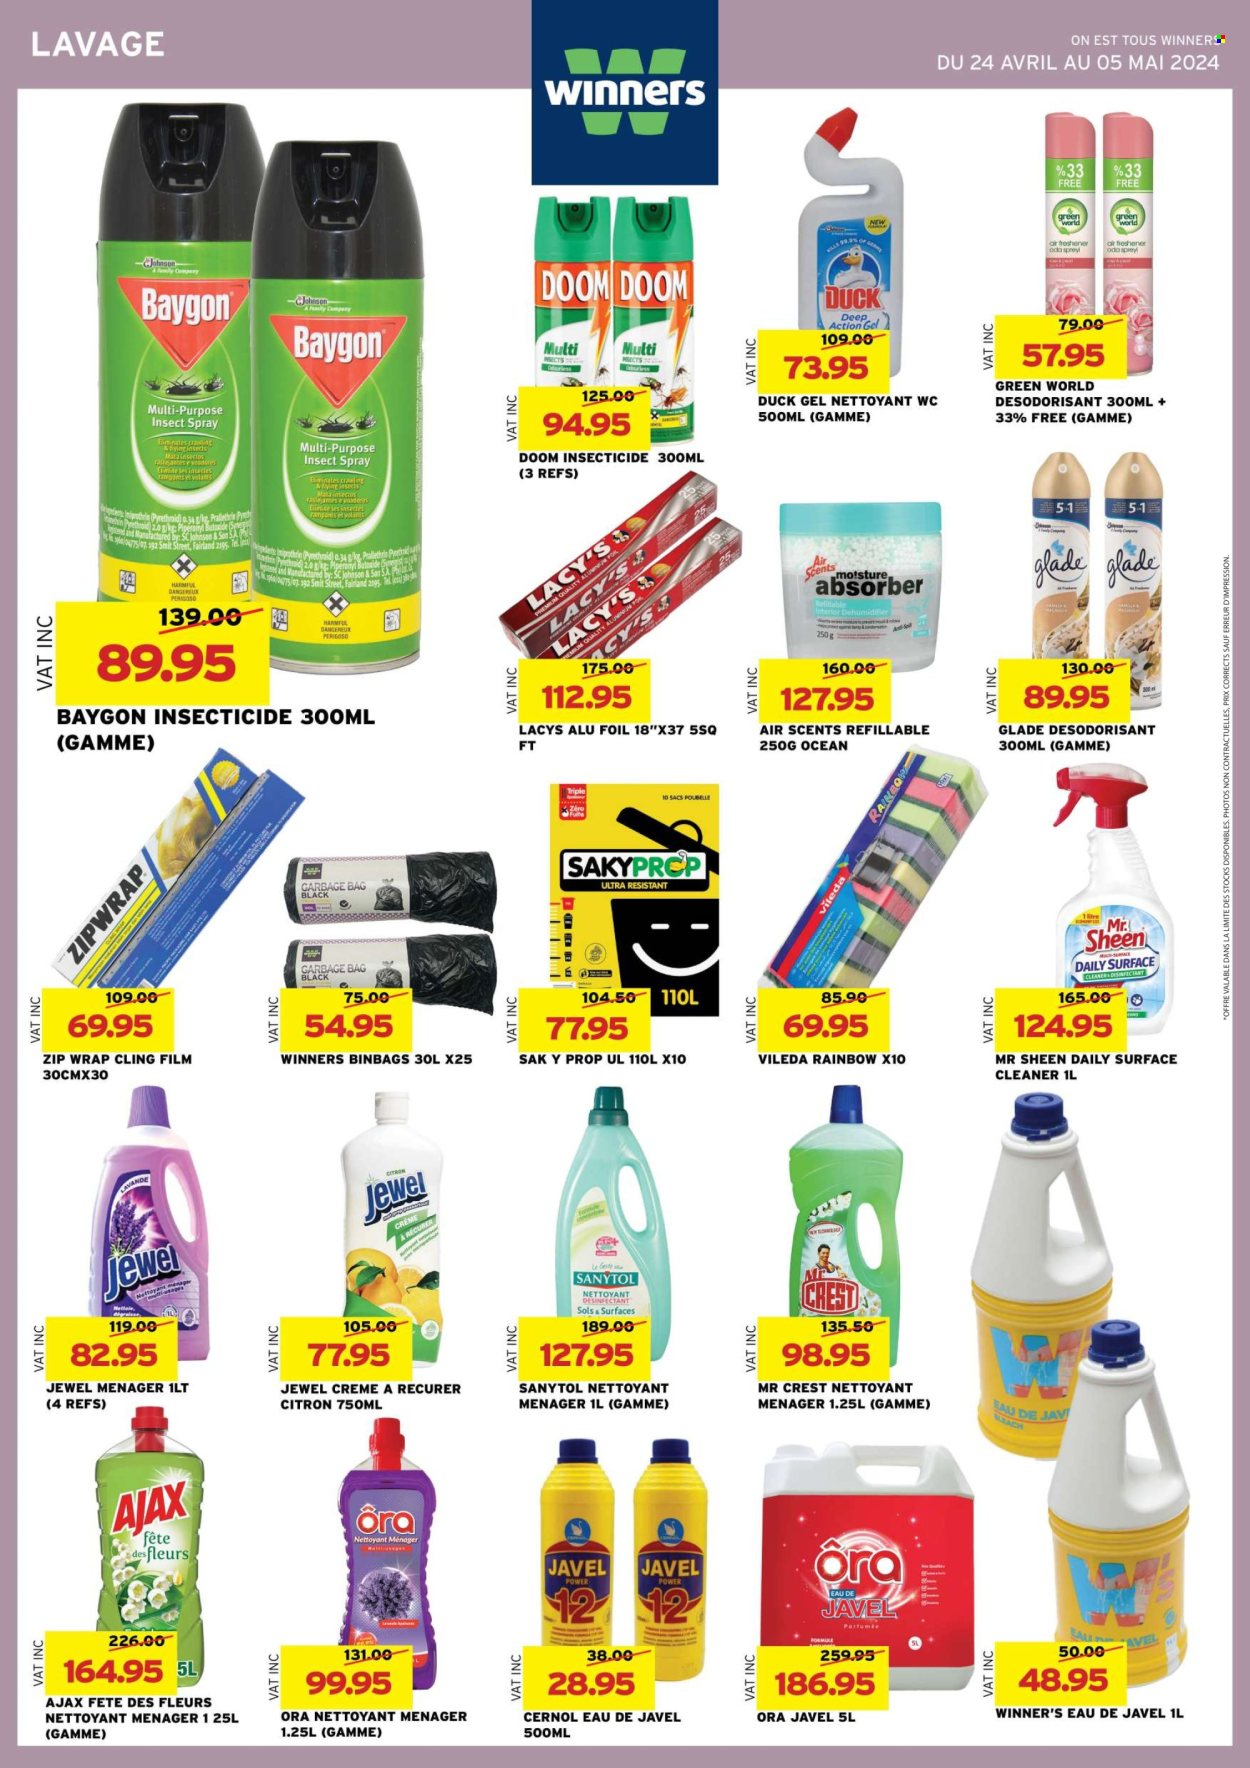 thumbnail - Winner's Catalogue - 24.04.2024 - 5.05.2024 - Sales products - poultry meat, Johnson's, desinfection, surface cleaner, cleaner, bleach, Ajax, Crest, dehumidifier, bag, Vileda, aluminium foil, air freshener, Glade, Sanytol. Page 36.